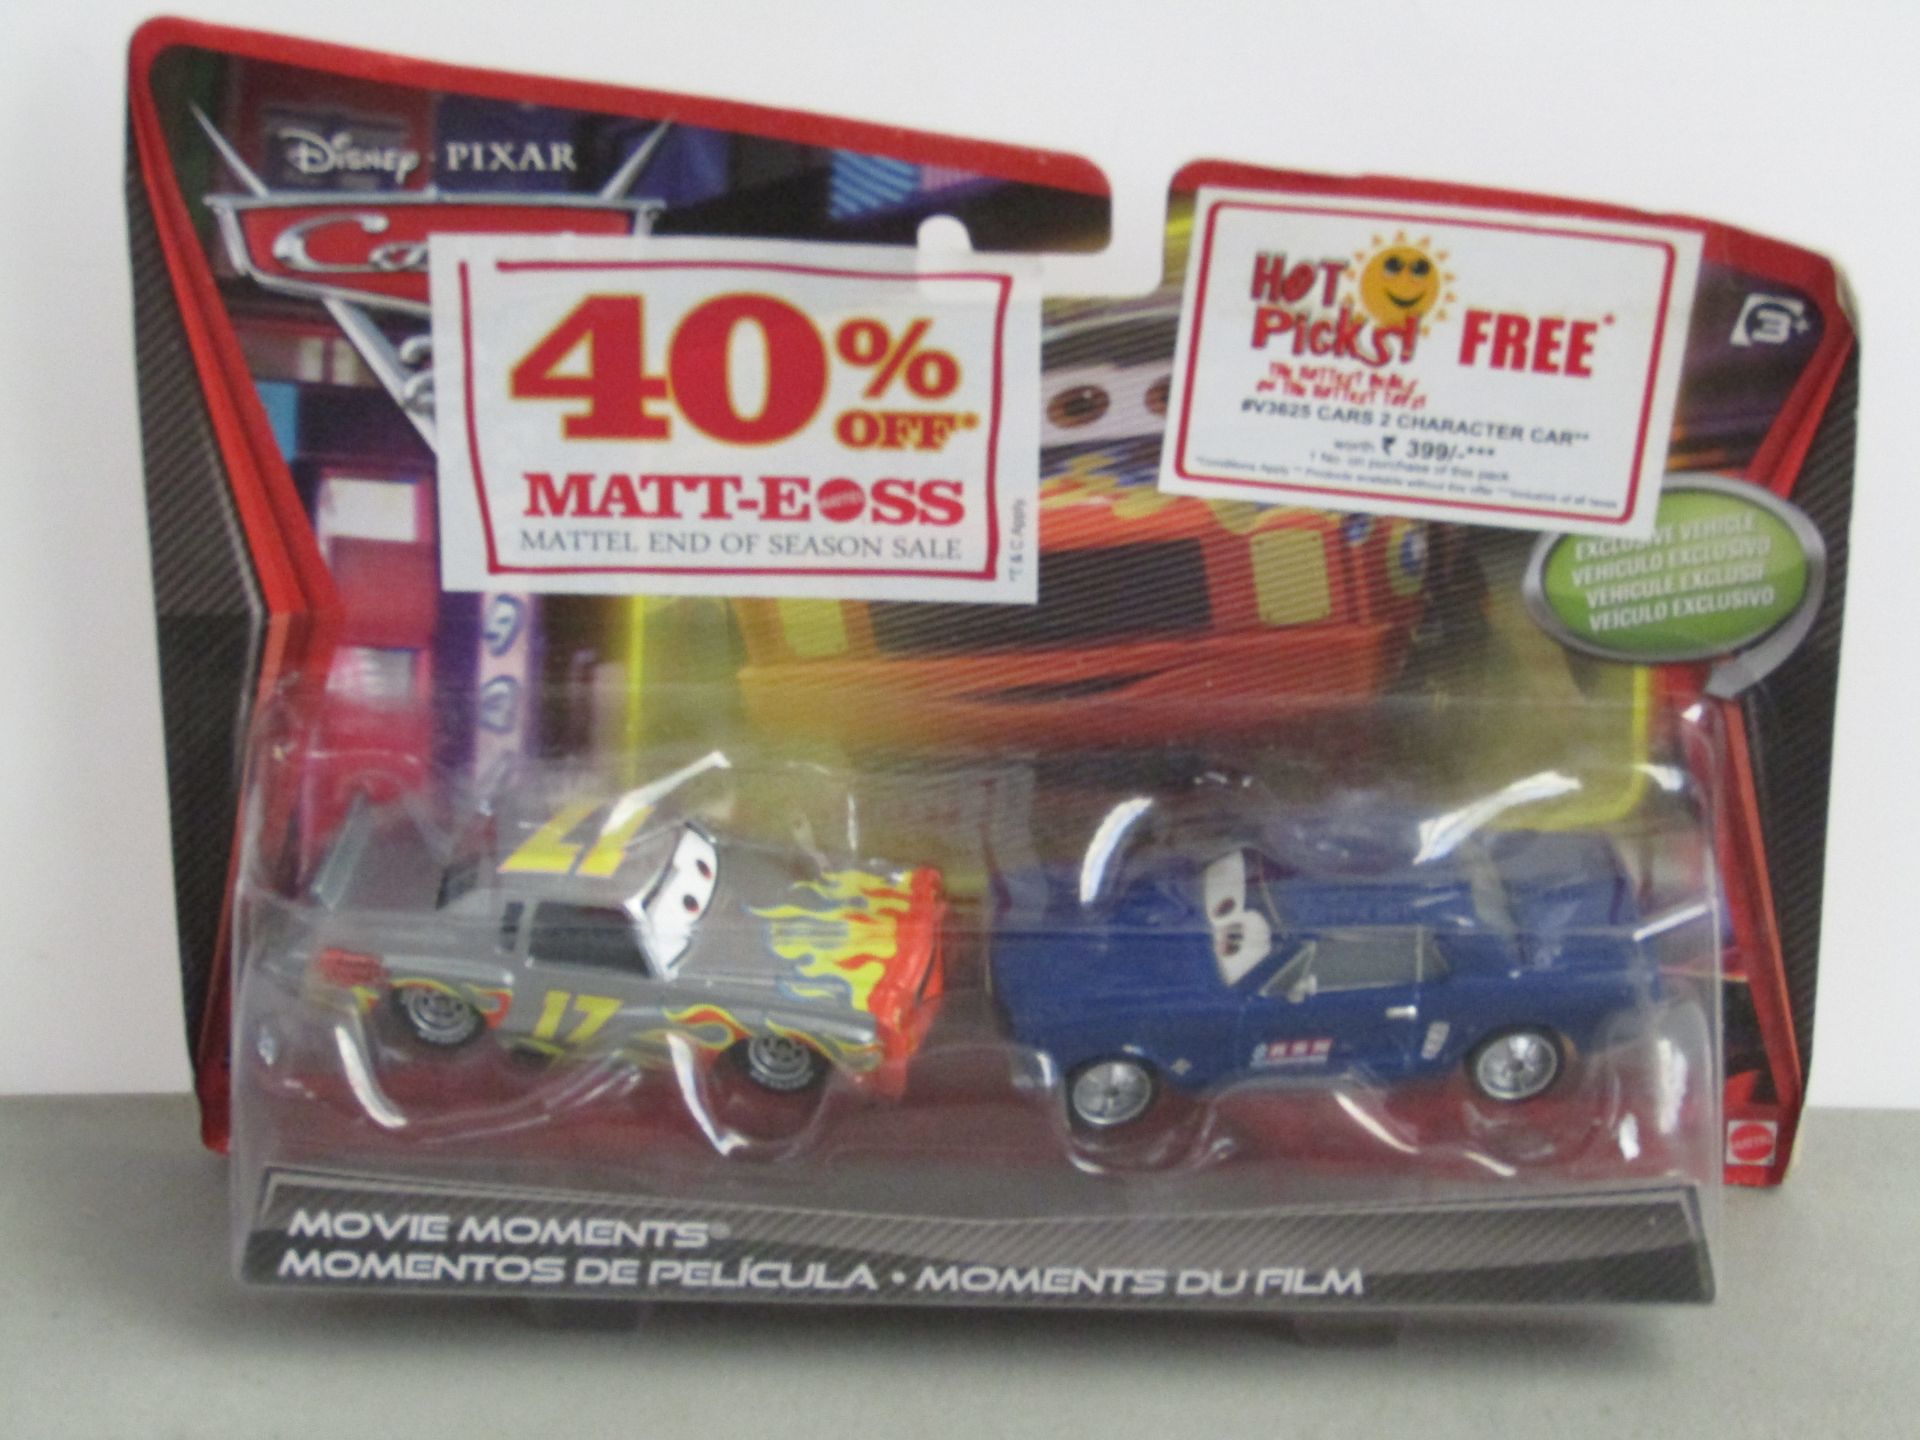 Disney Pixar Cars 2 Movie Moments Set of 2x Cars. New In Packaging.